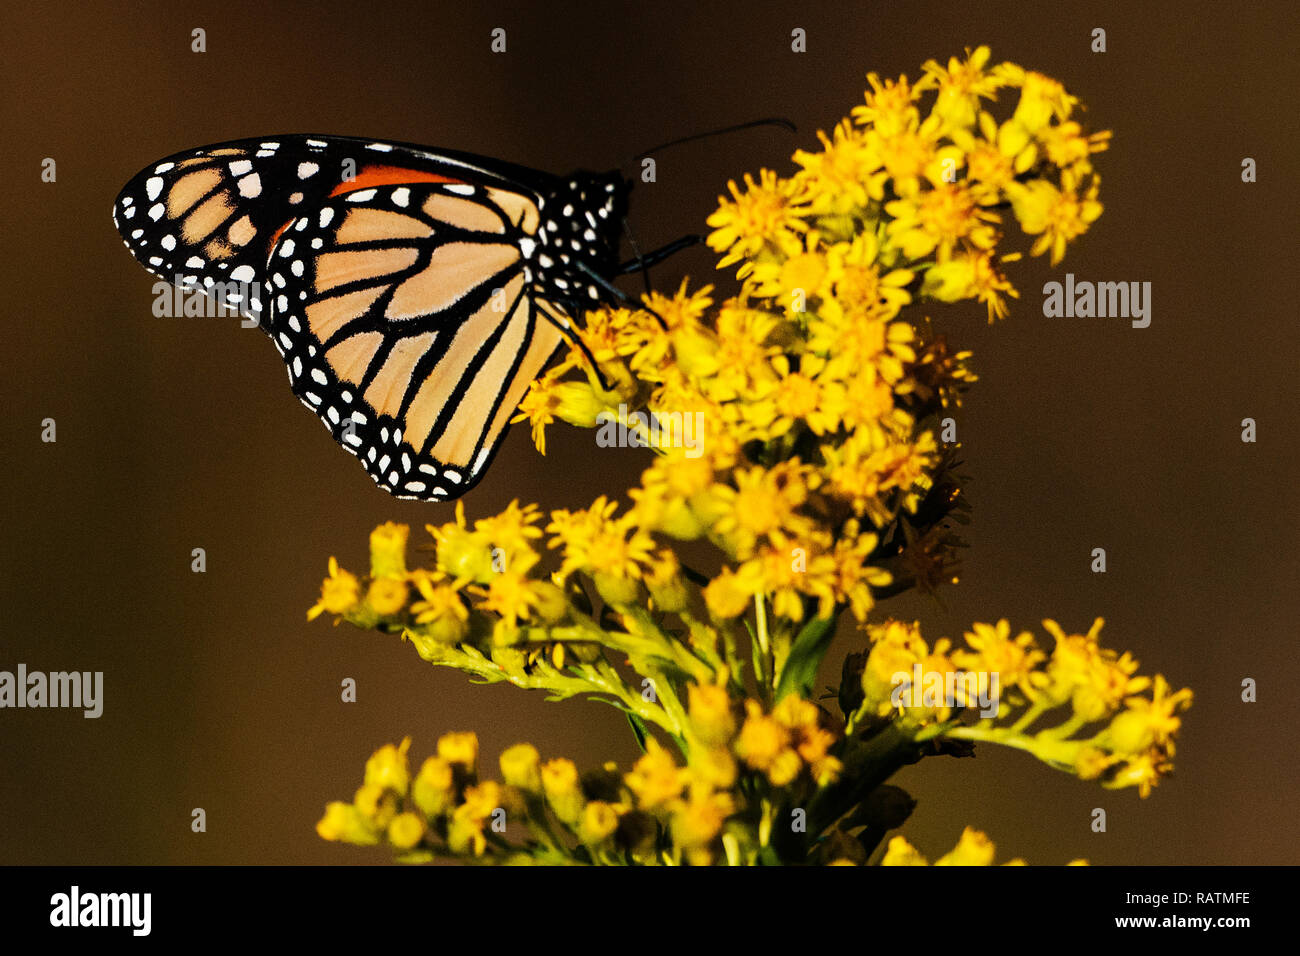 Migrating monarch butterflies foraging on autumn seaside goldenrod Stock Photo